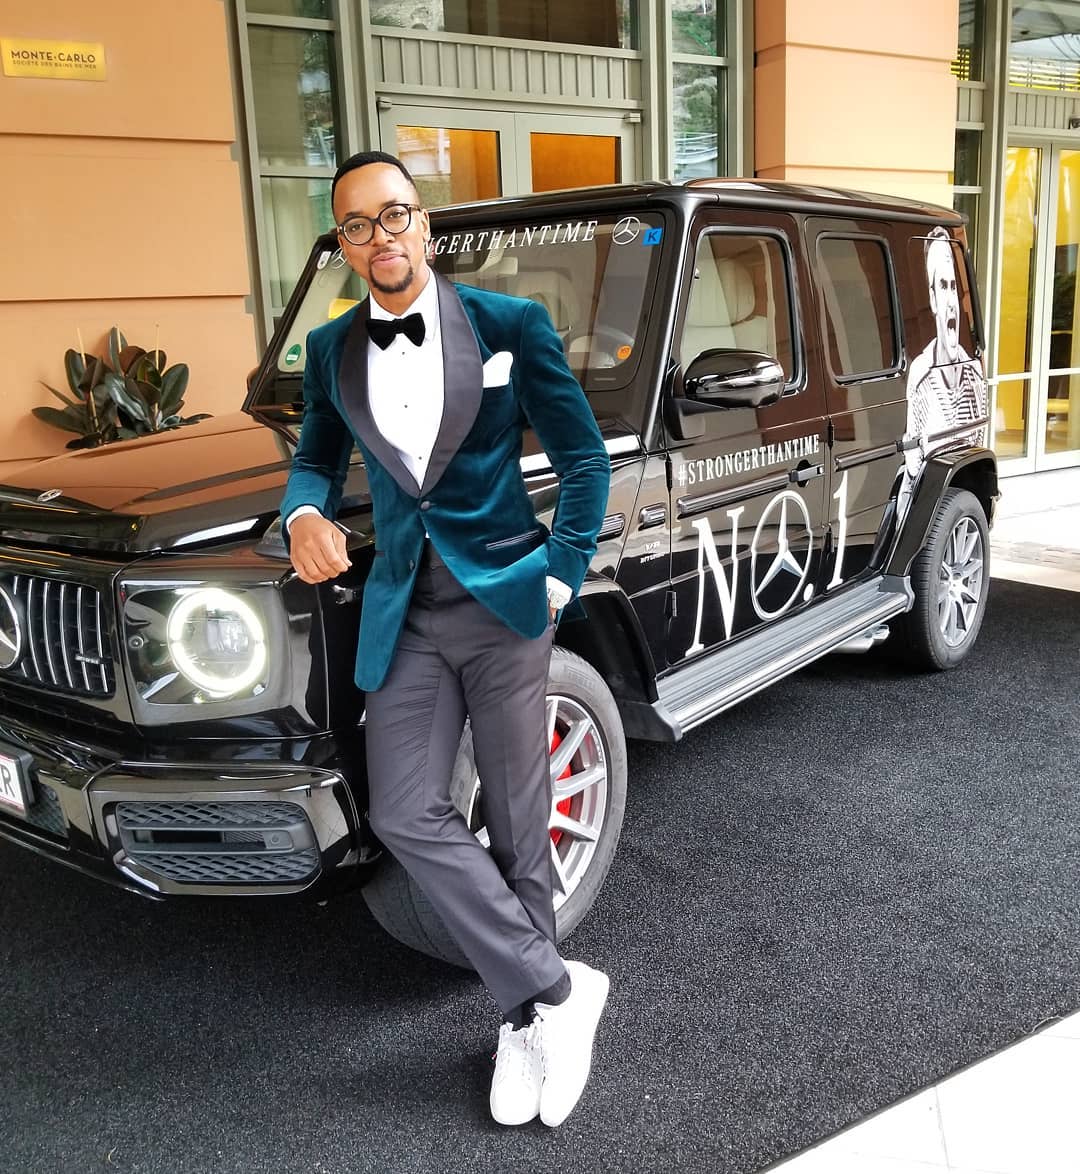 Maps Maponyane chauffeurs students to the Matric Dance